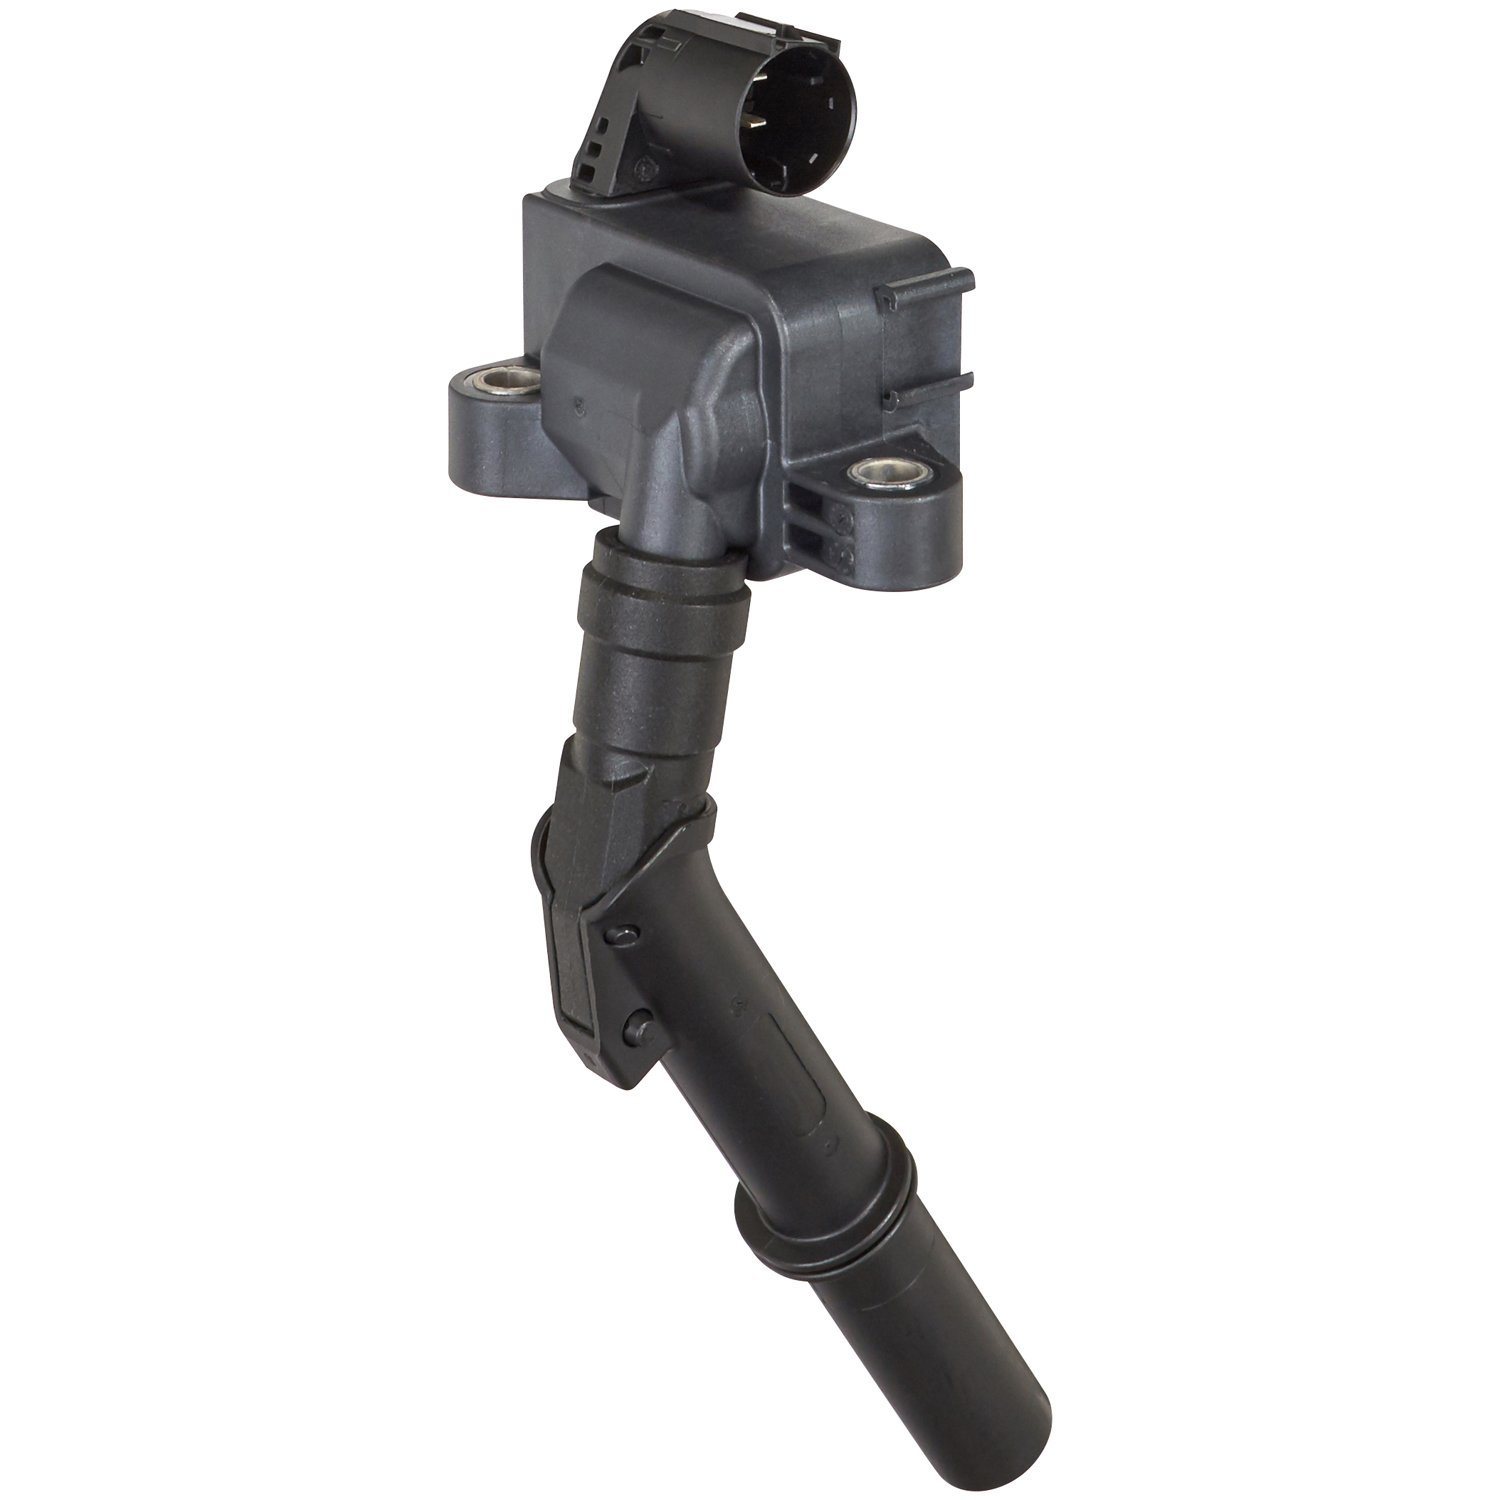 Ignition Coil for Mercedes Benz Cls/Gle/C-Class/E-Class/S-Class 2769063700 2769060260 2769060259 2769060160